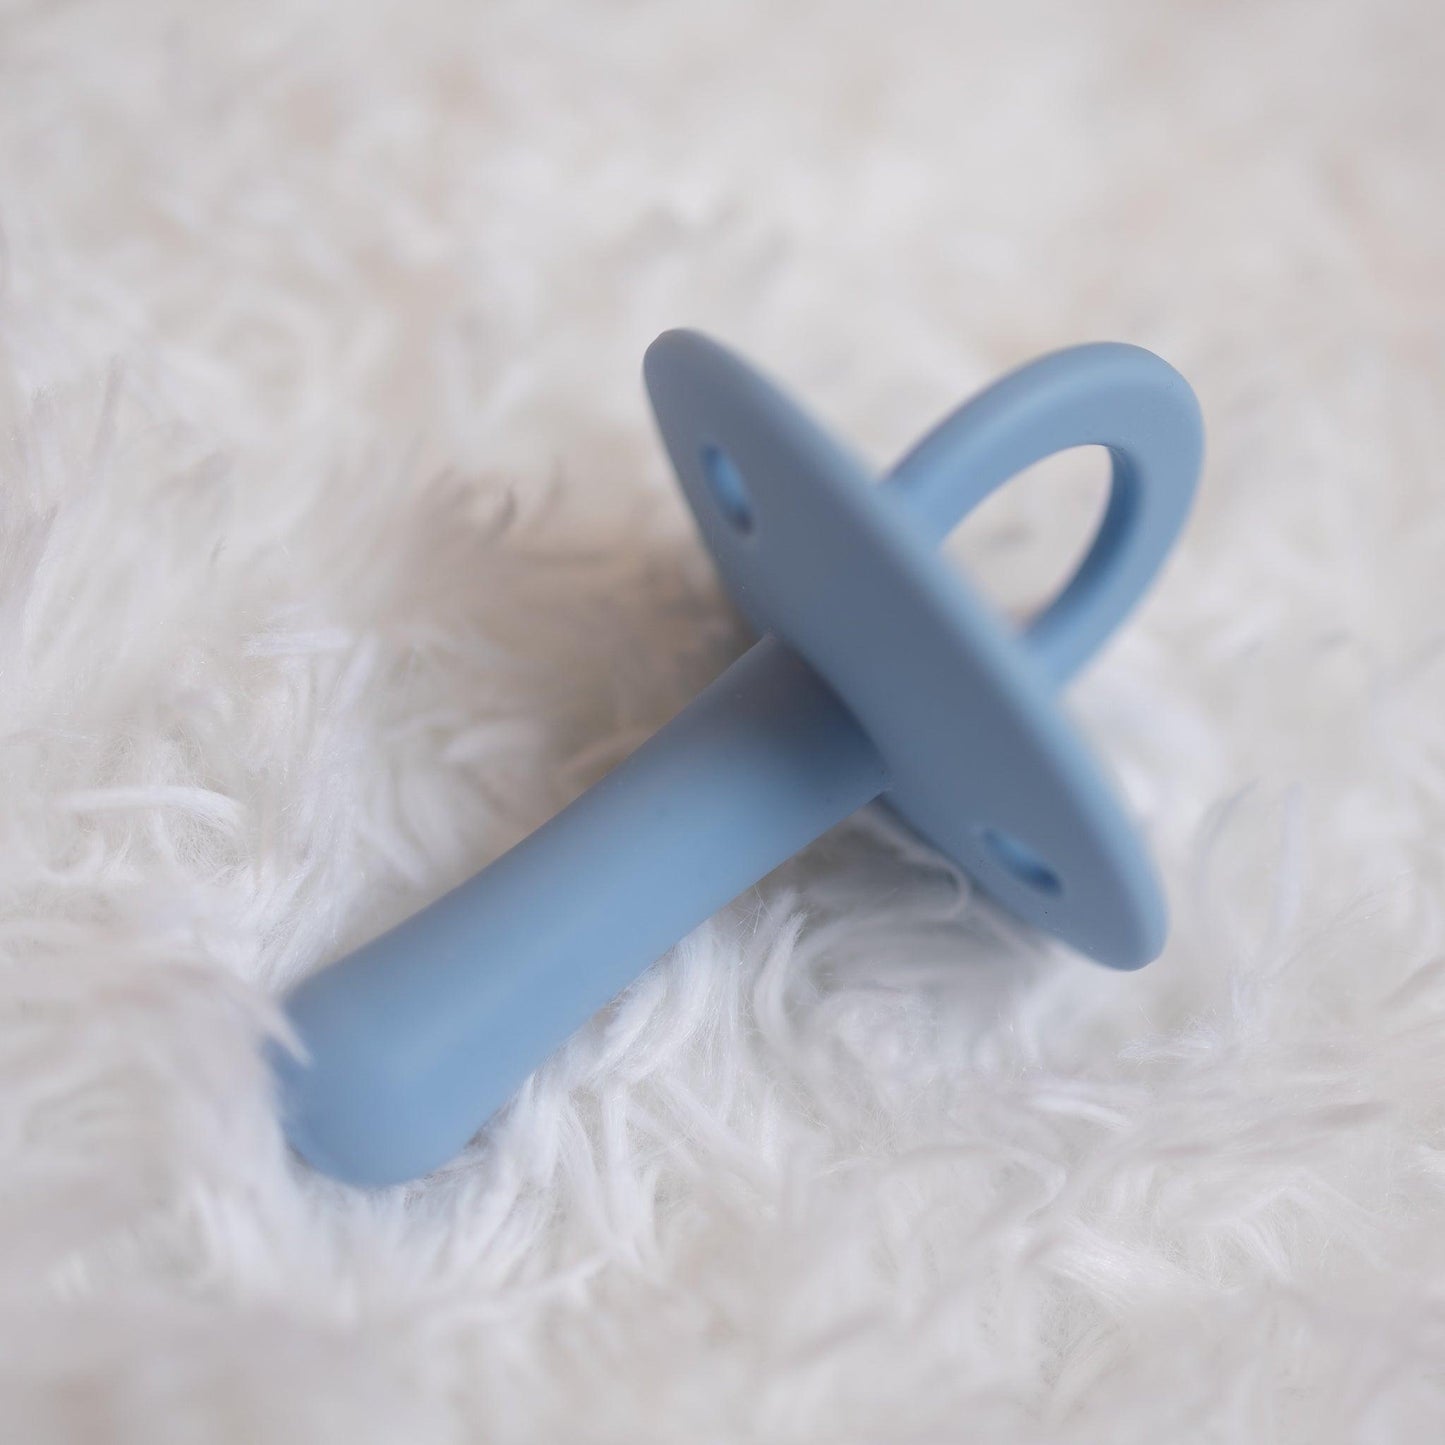 Powder Blue- Adult Silicone Pacifier - Lil Comforts